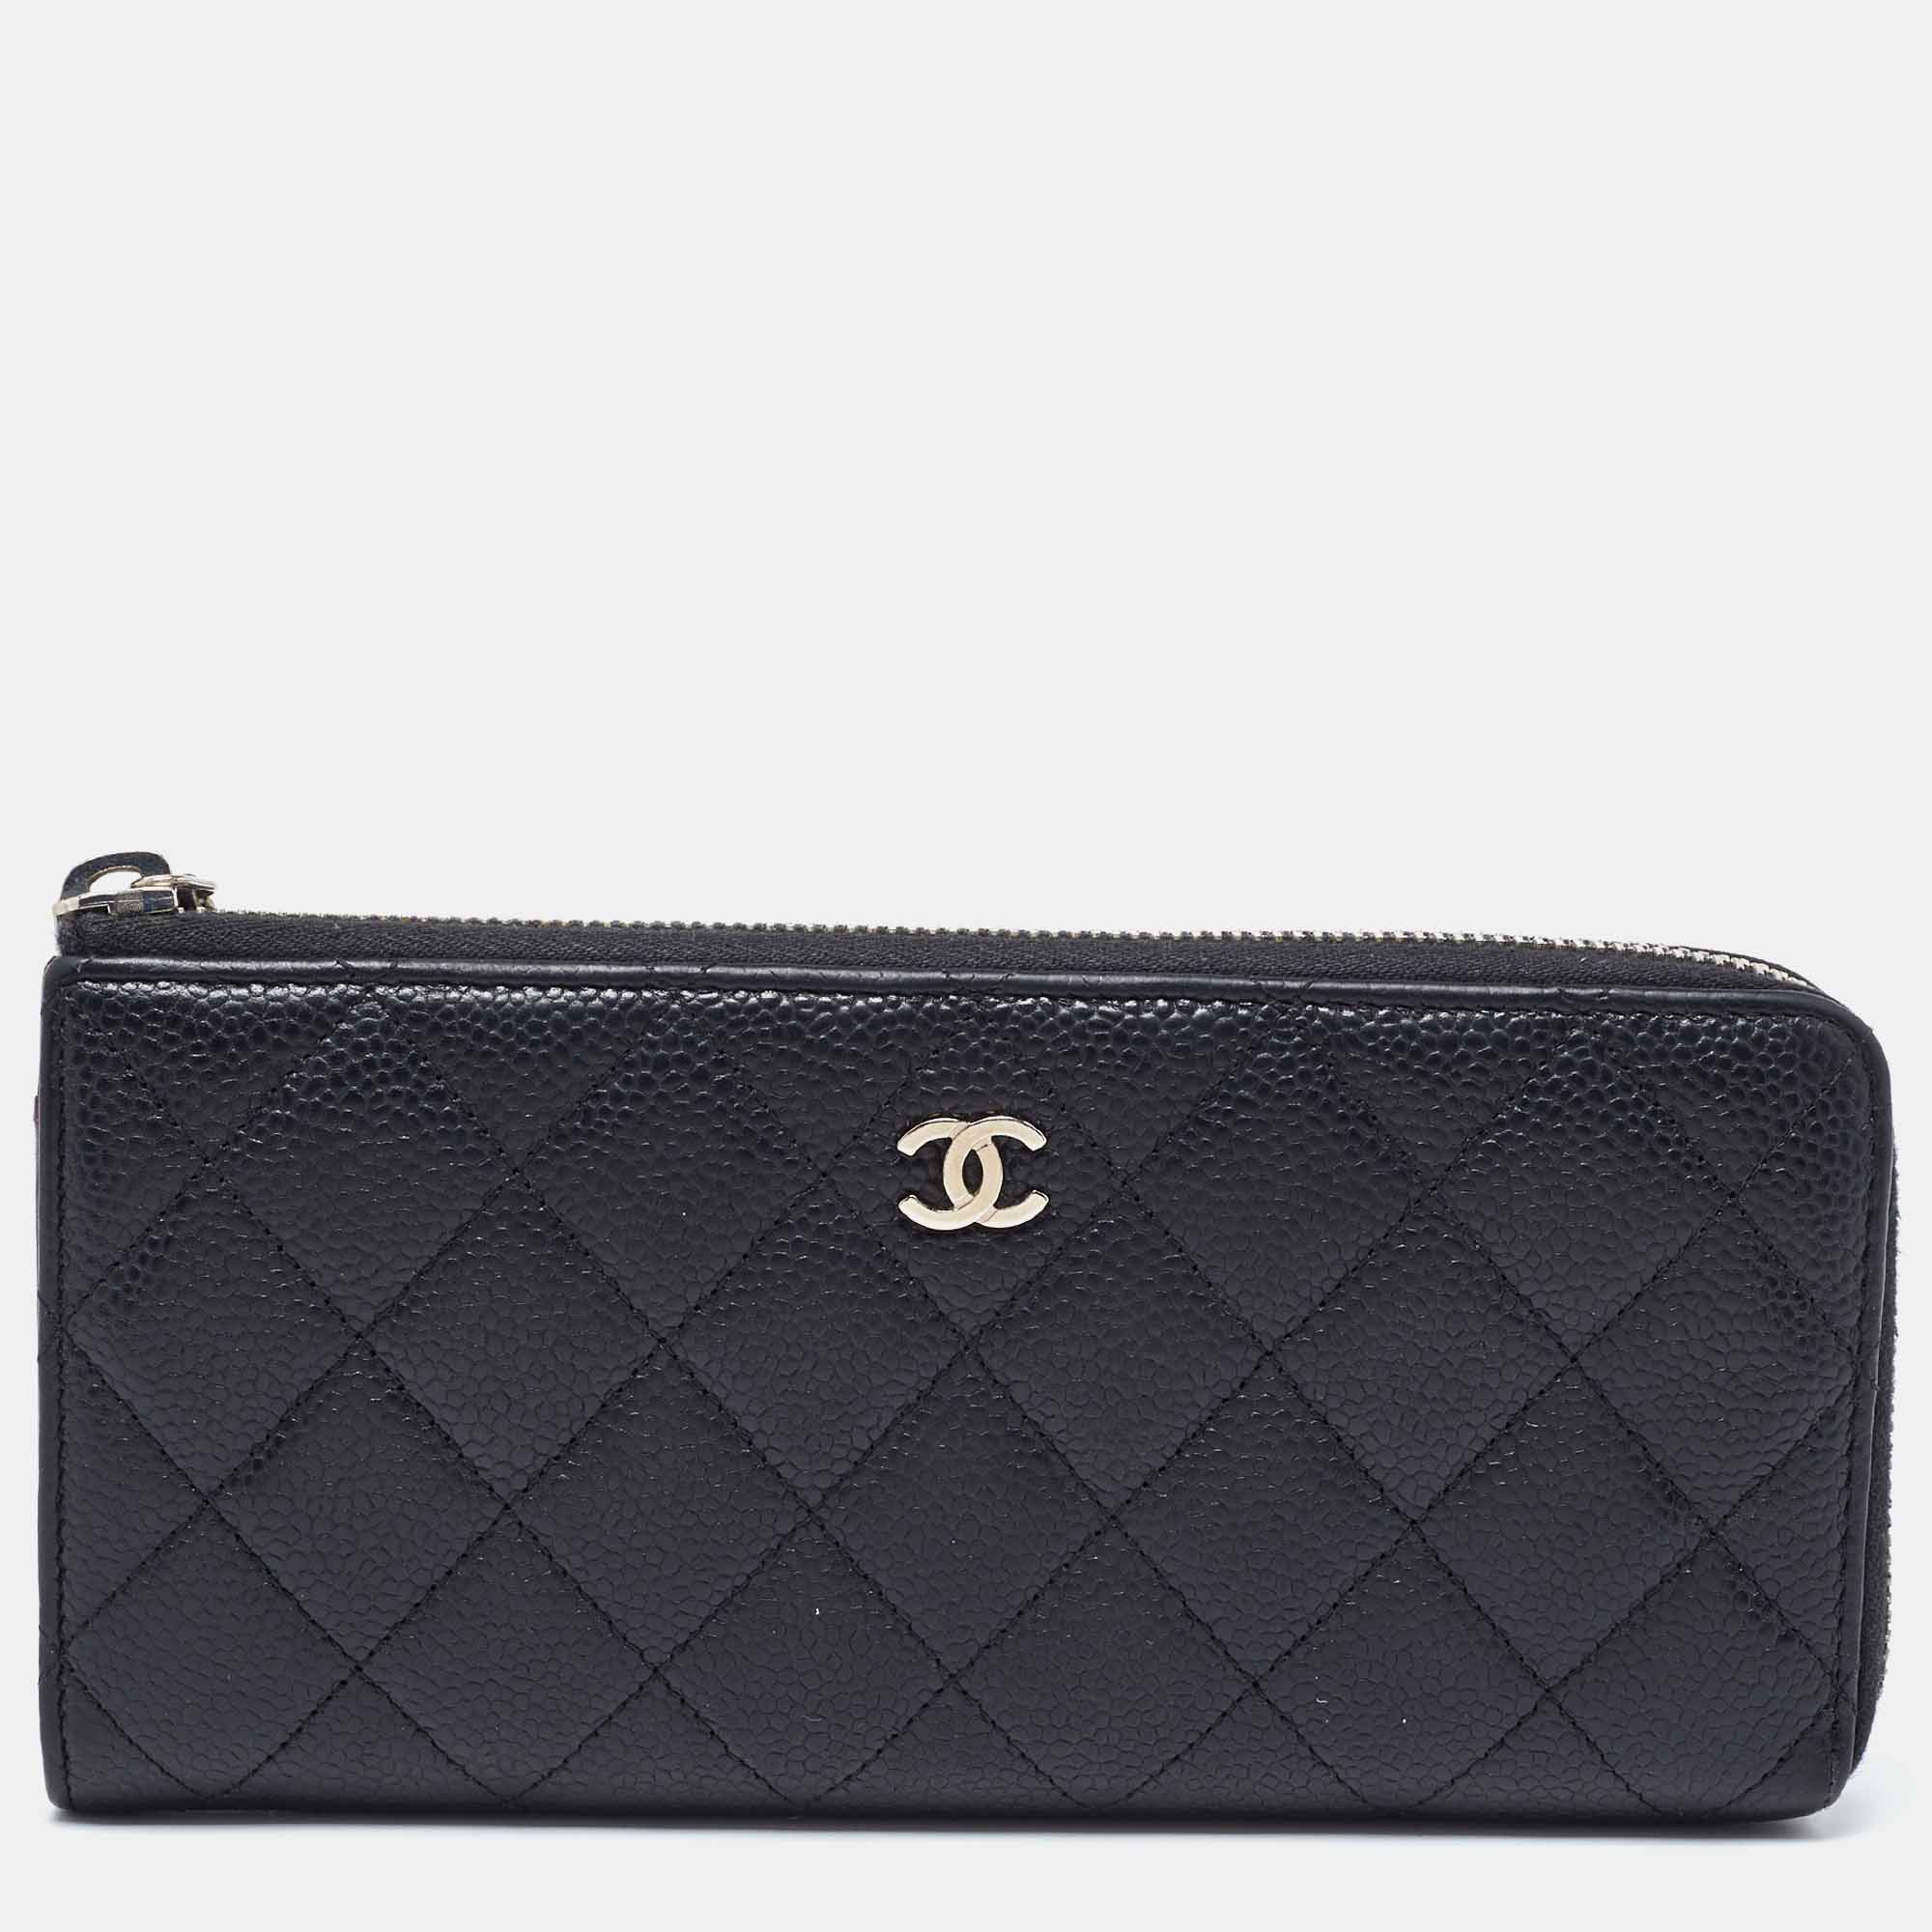 

Chanel Black Quilted Caviar Leather Zip Around Wallet